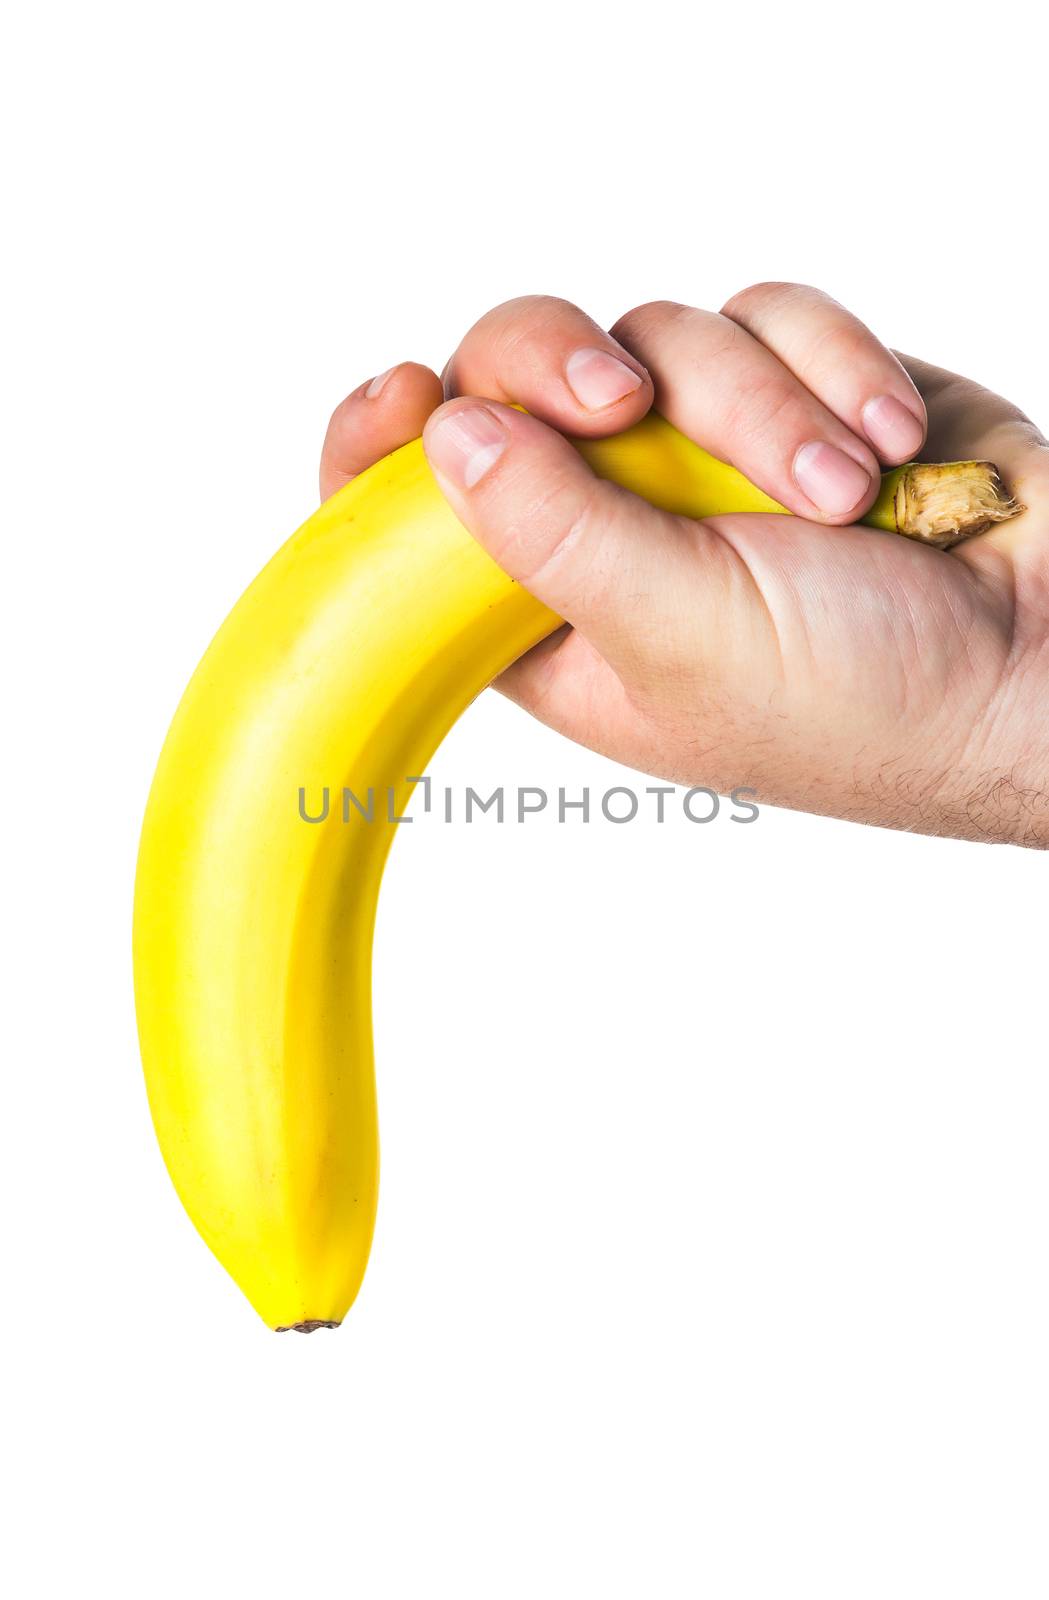 man's hand holding a banana like a big penis upside down that symbolizes lack of erection and impotence